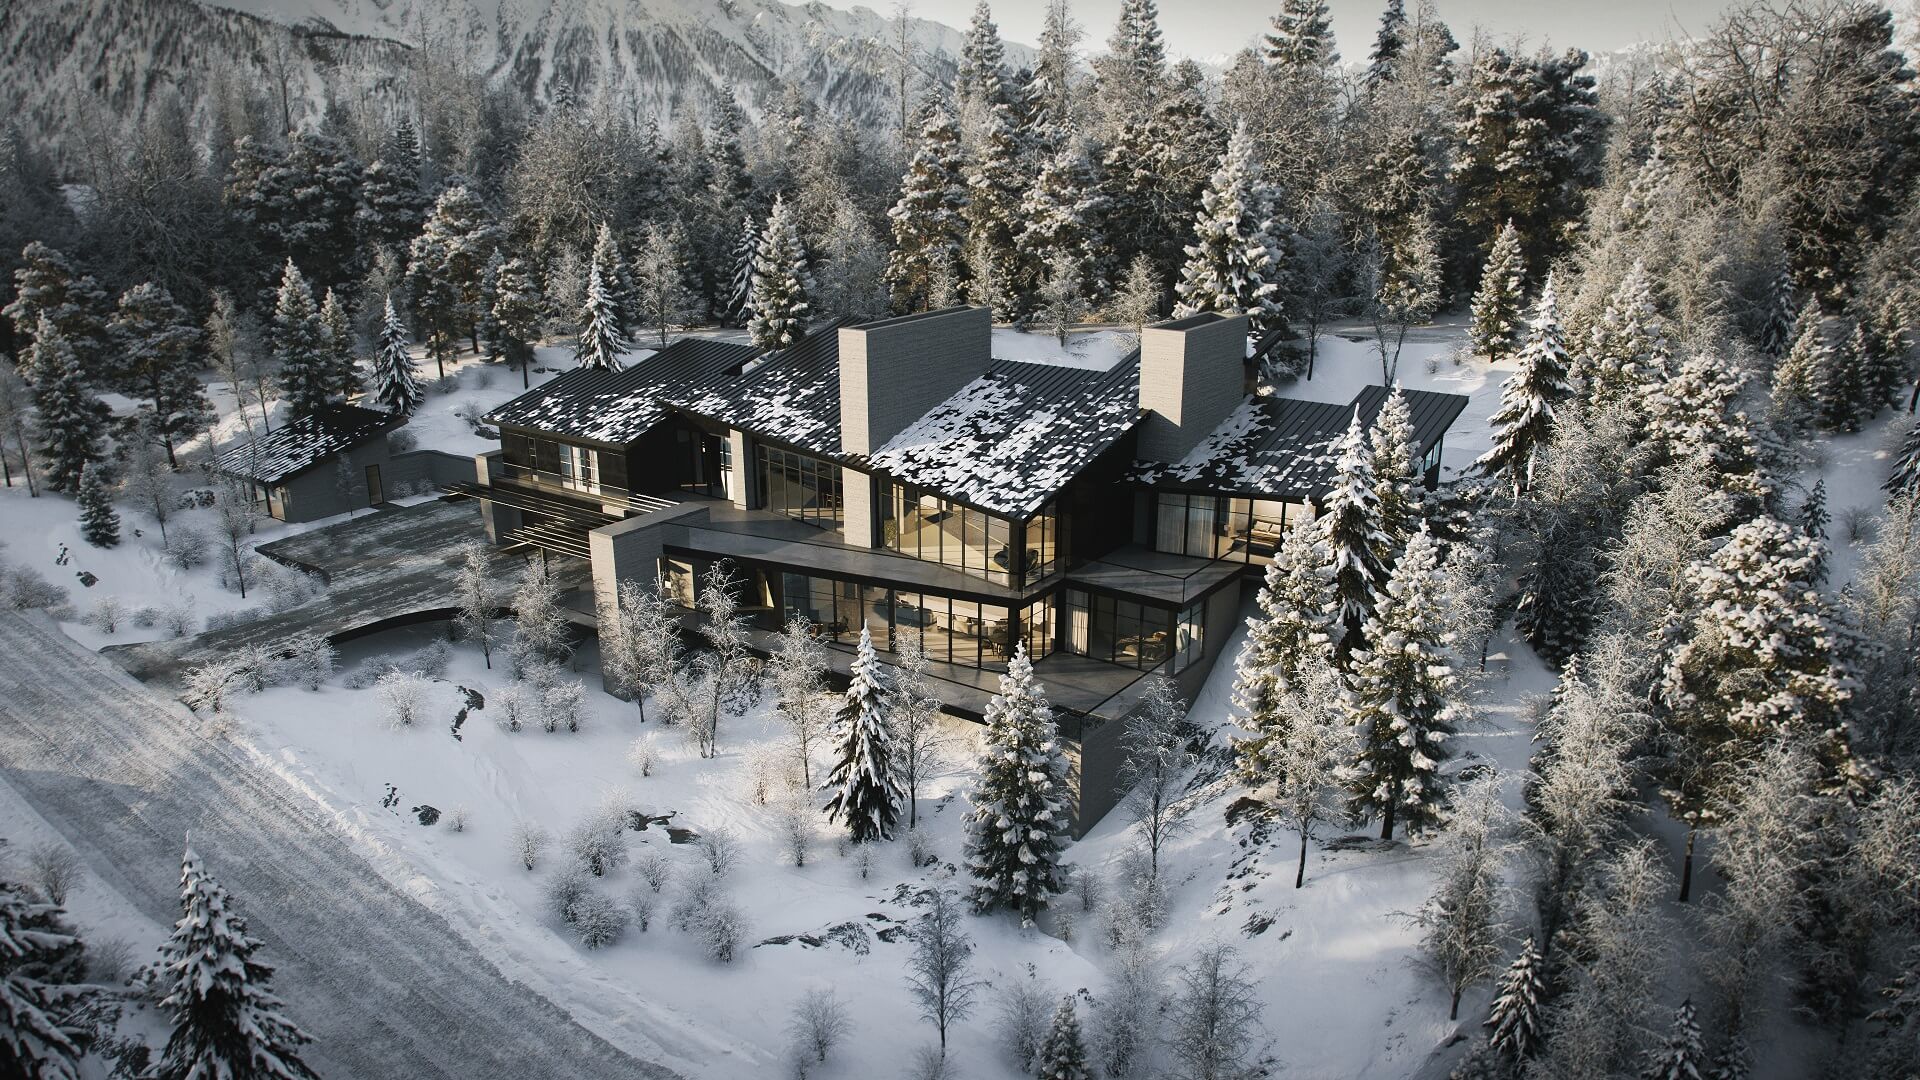 3D Architectural Visualization for a House in Snowy Mountains